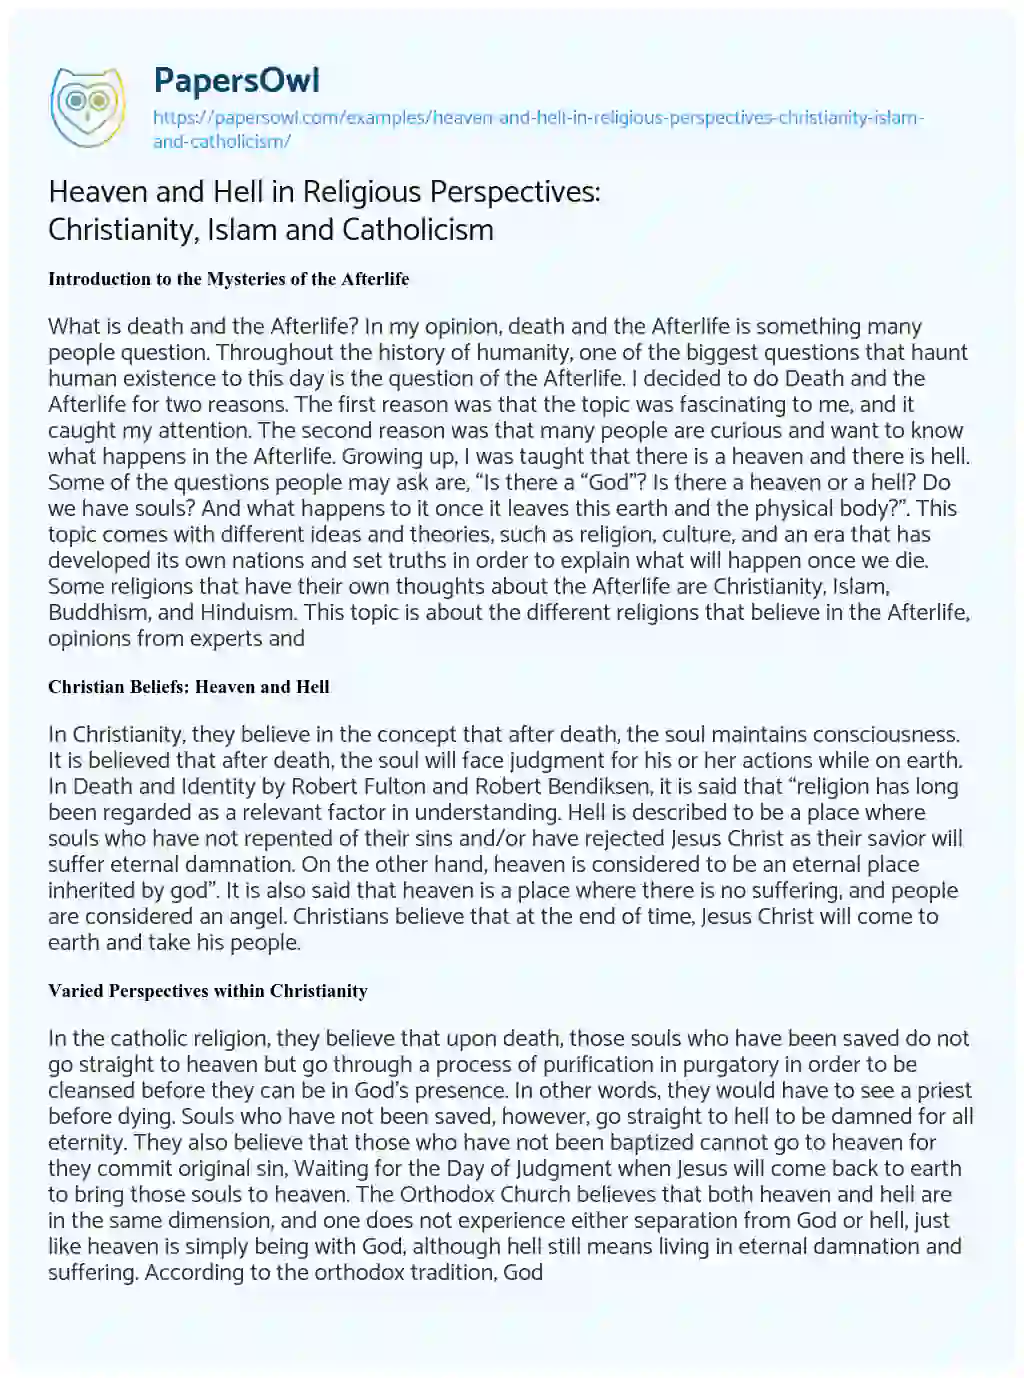 Essay on Heaven and Hell in Religious Perspectives: Christianity, Islam and Catholicism